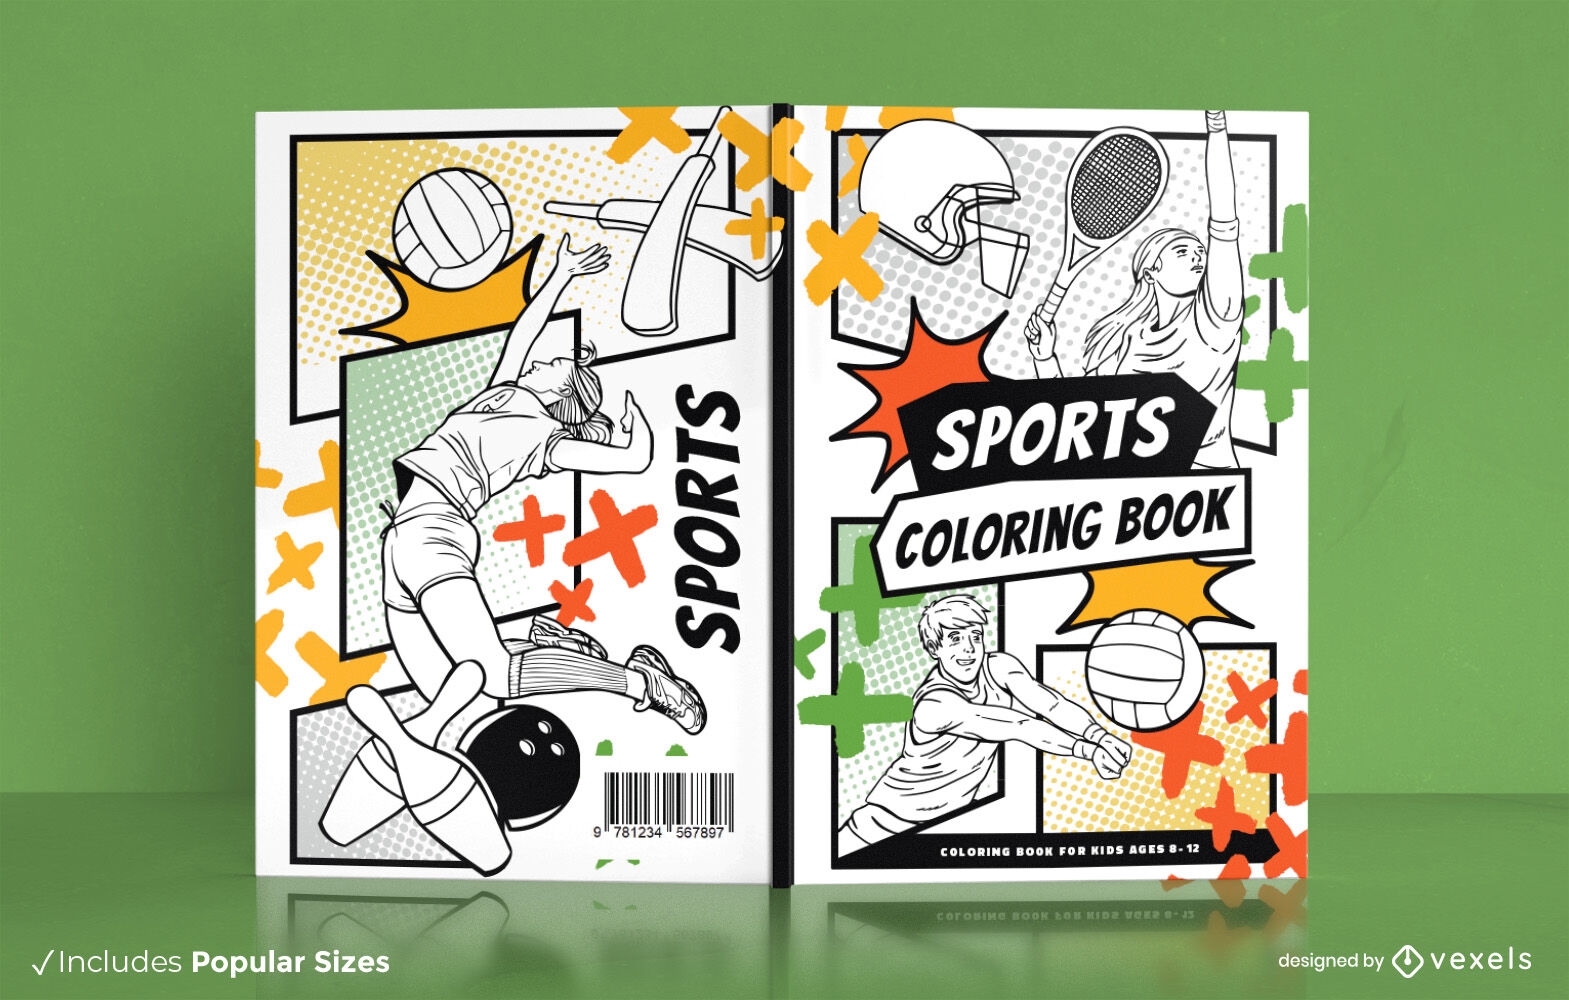 Sports Coloring Books For Kids Ages 8-12: Includes Basketball, Football,  Baseball and More!